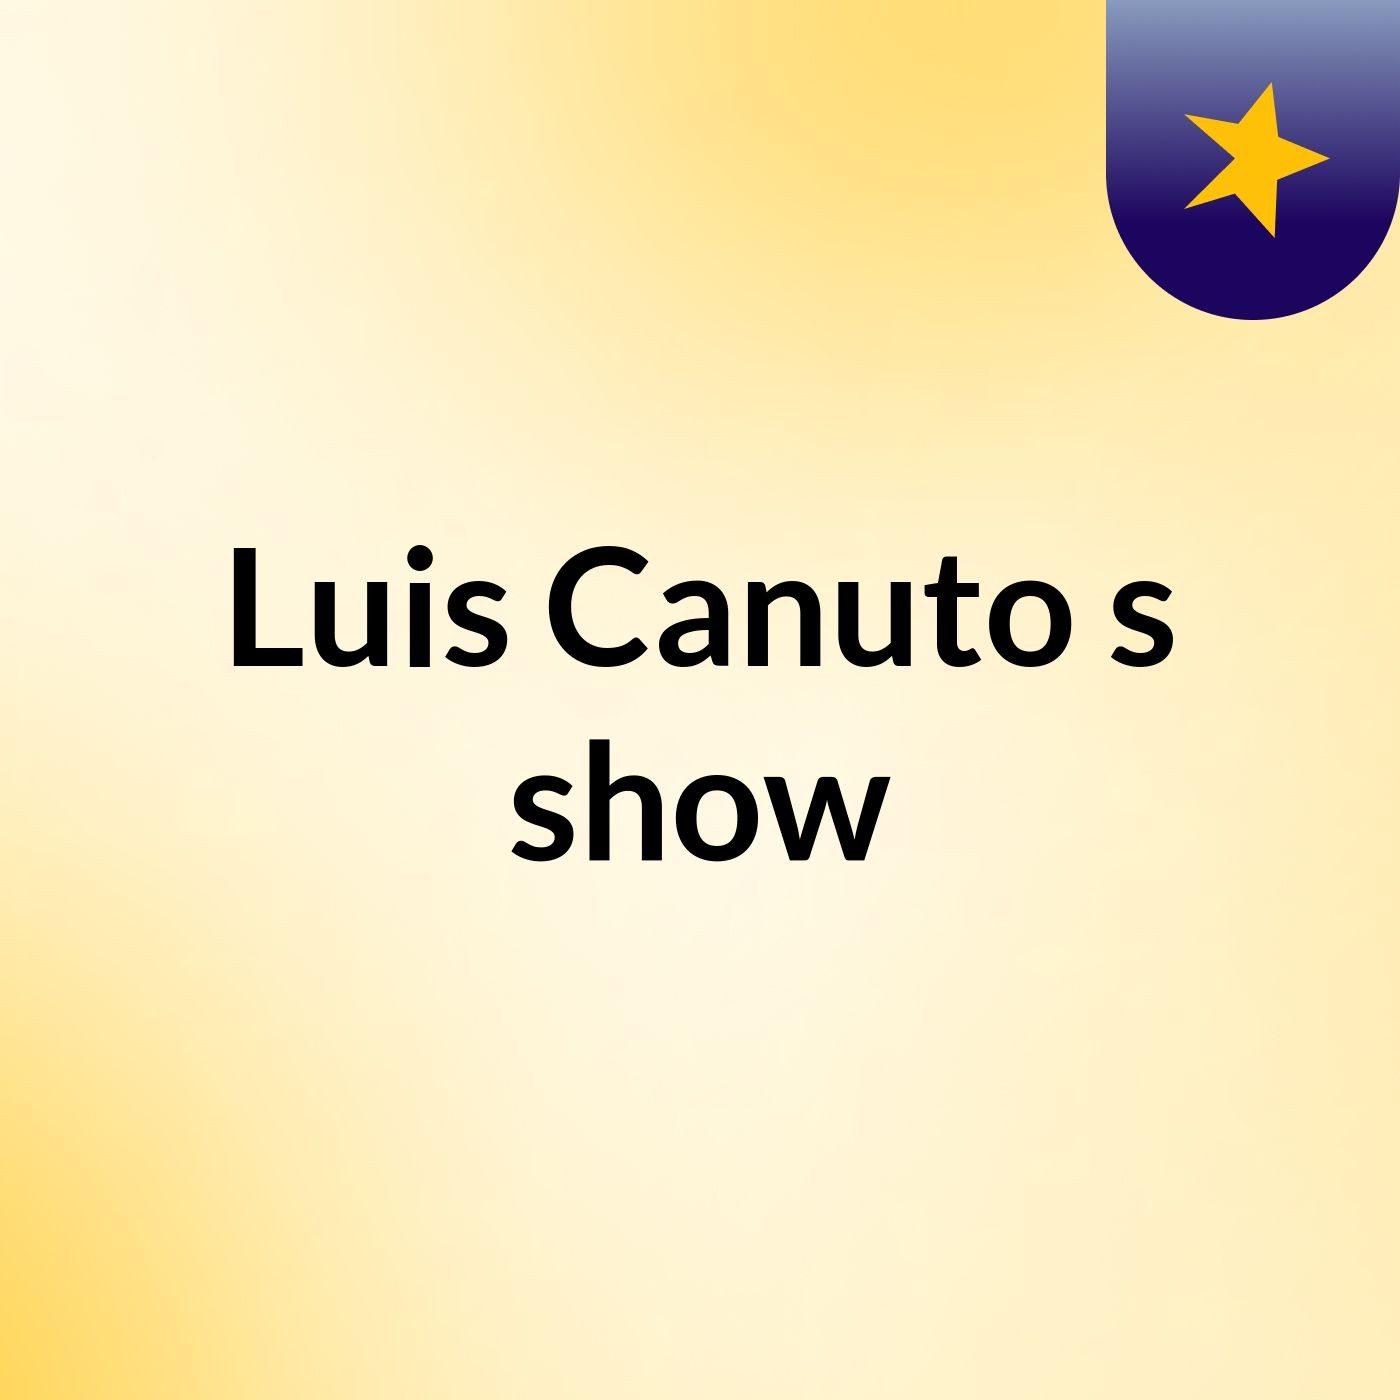 Luis Canuto's show